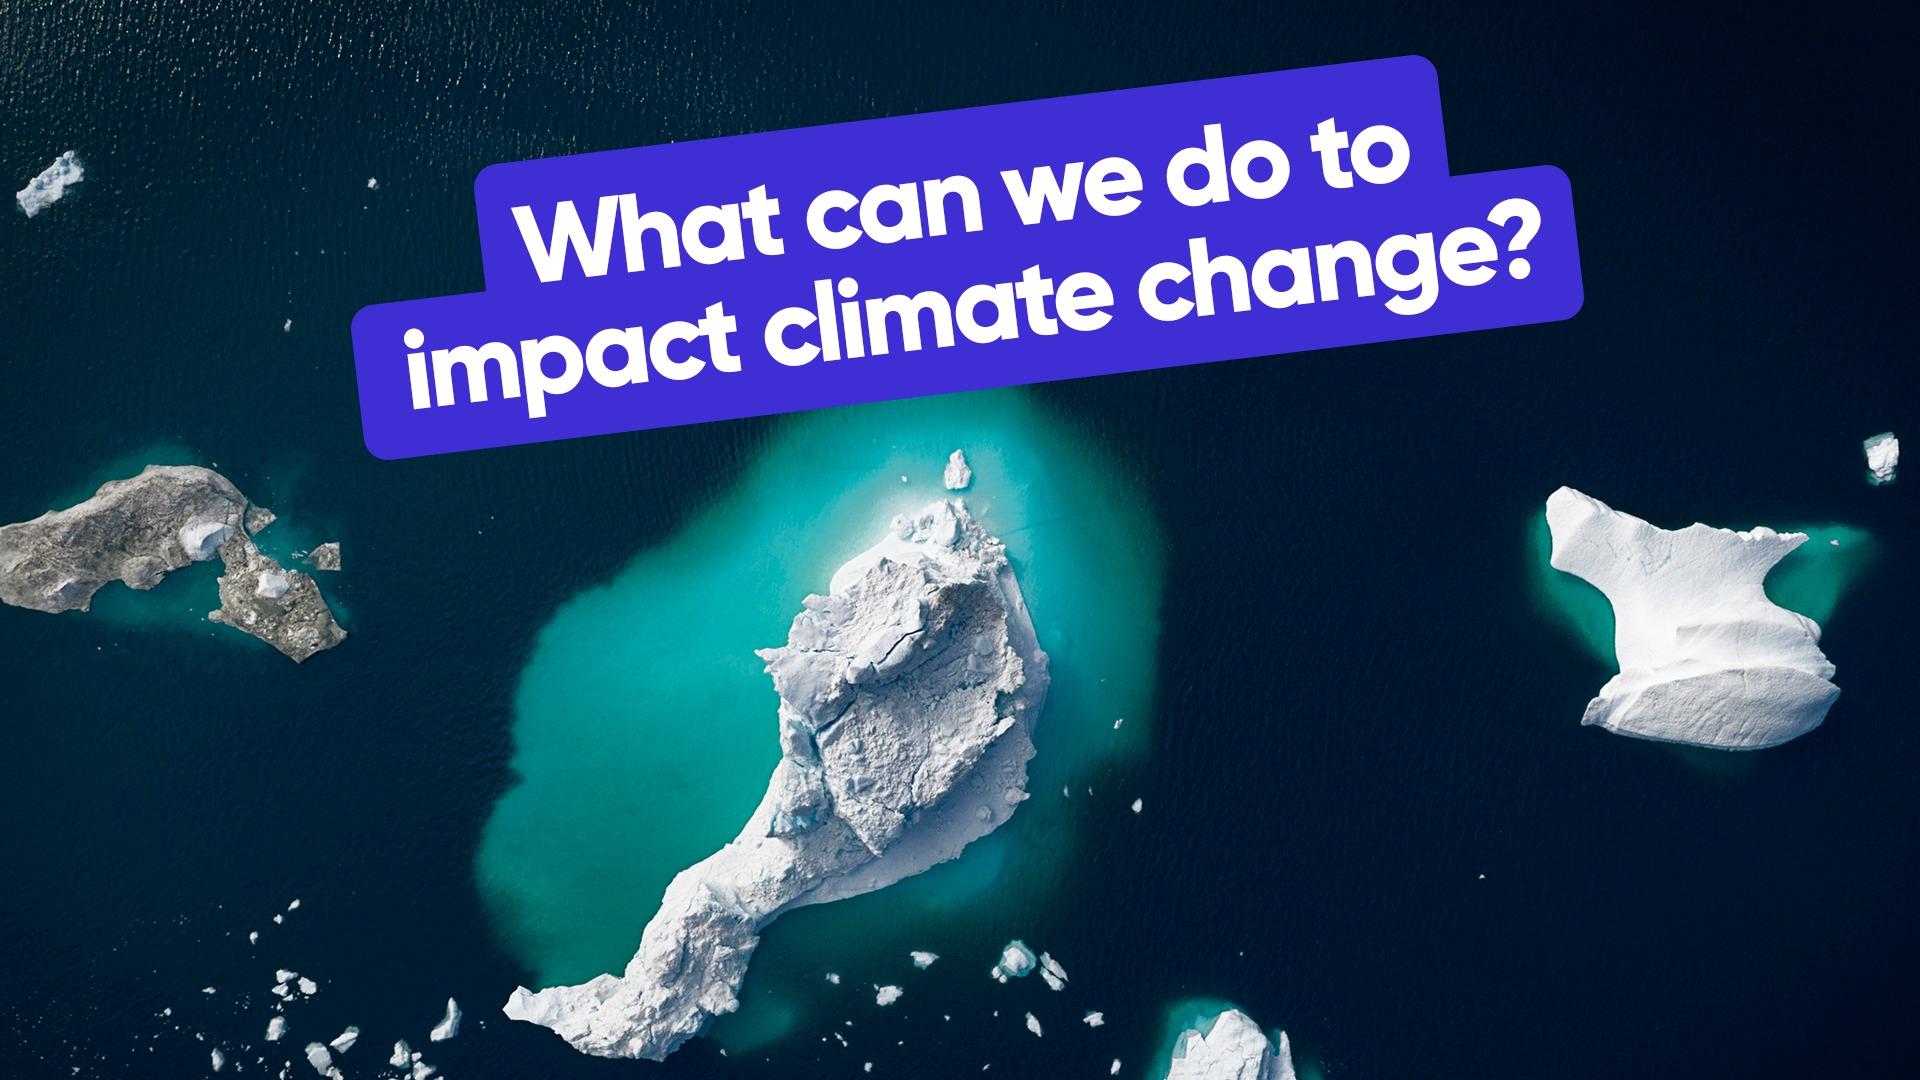  What can we do to impact climate change?